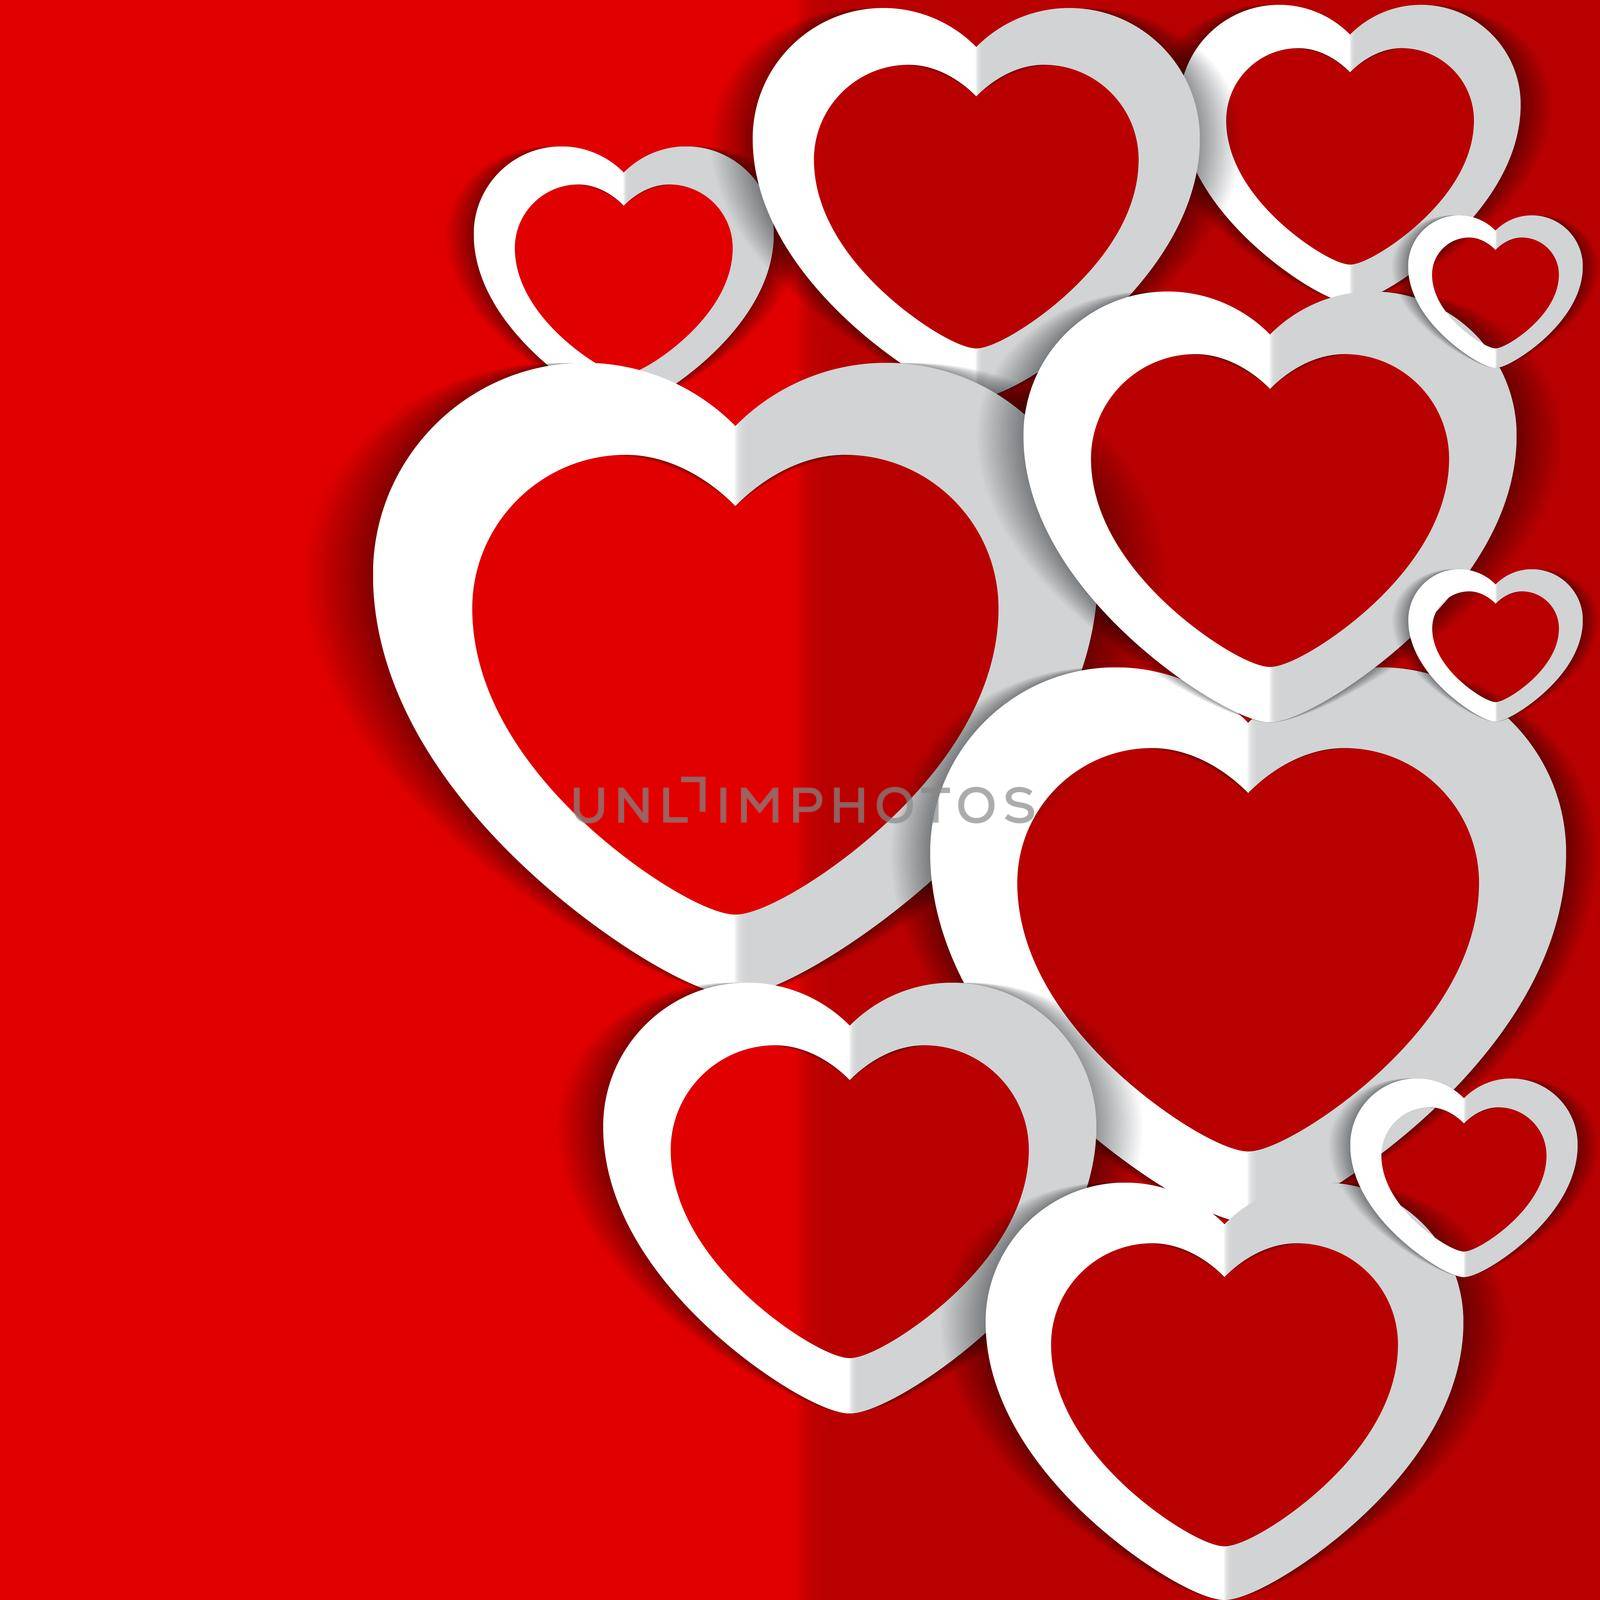 illustration of Hearts for Valentine s Day on red background.